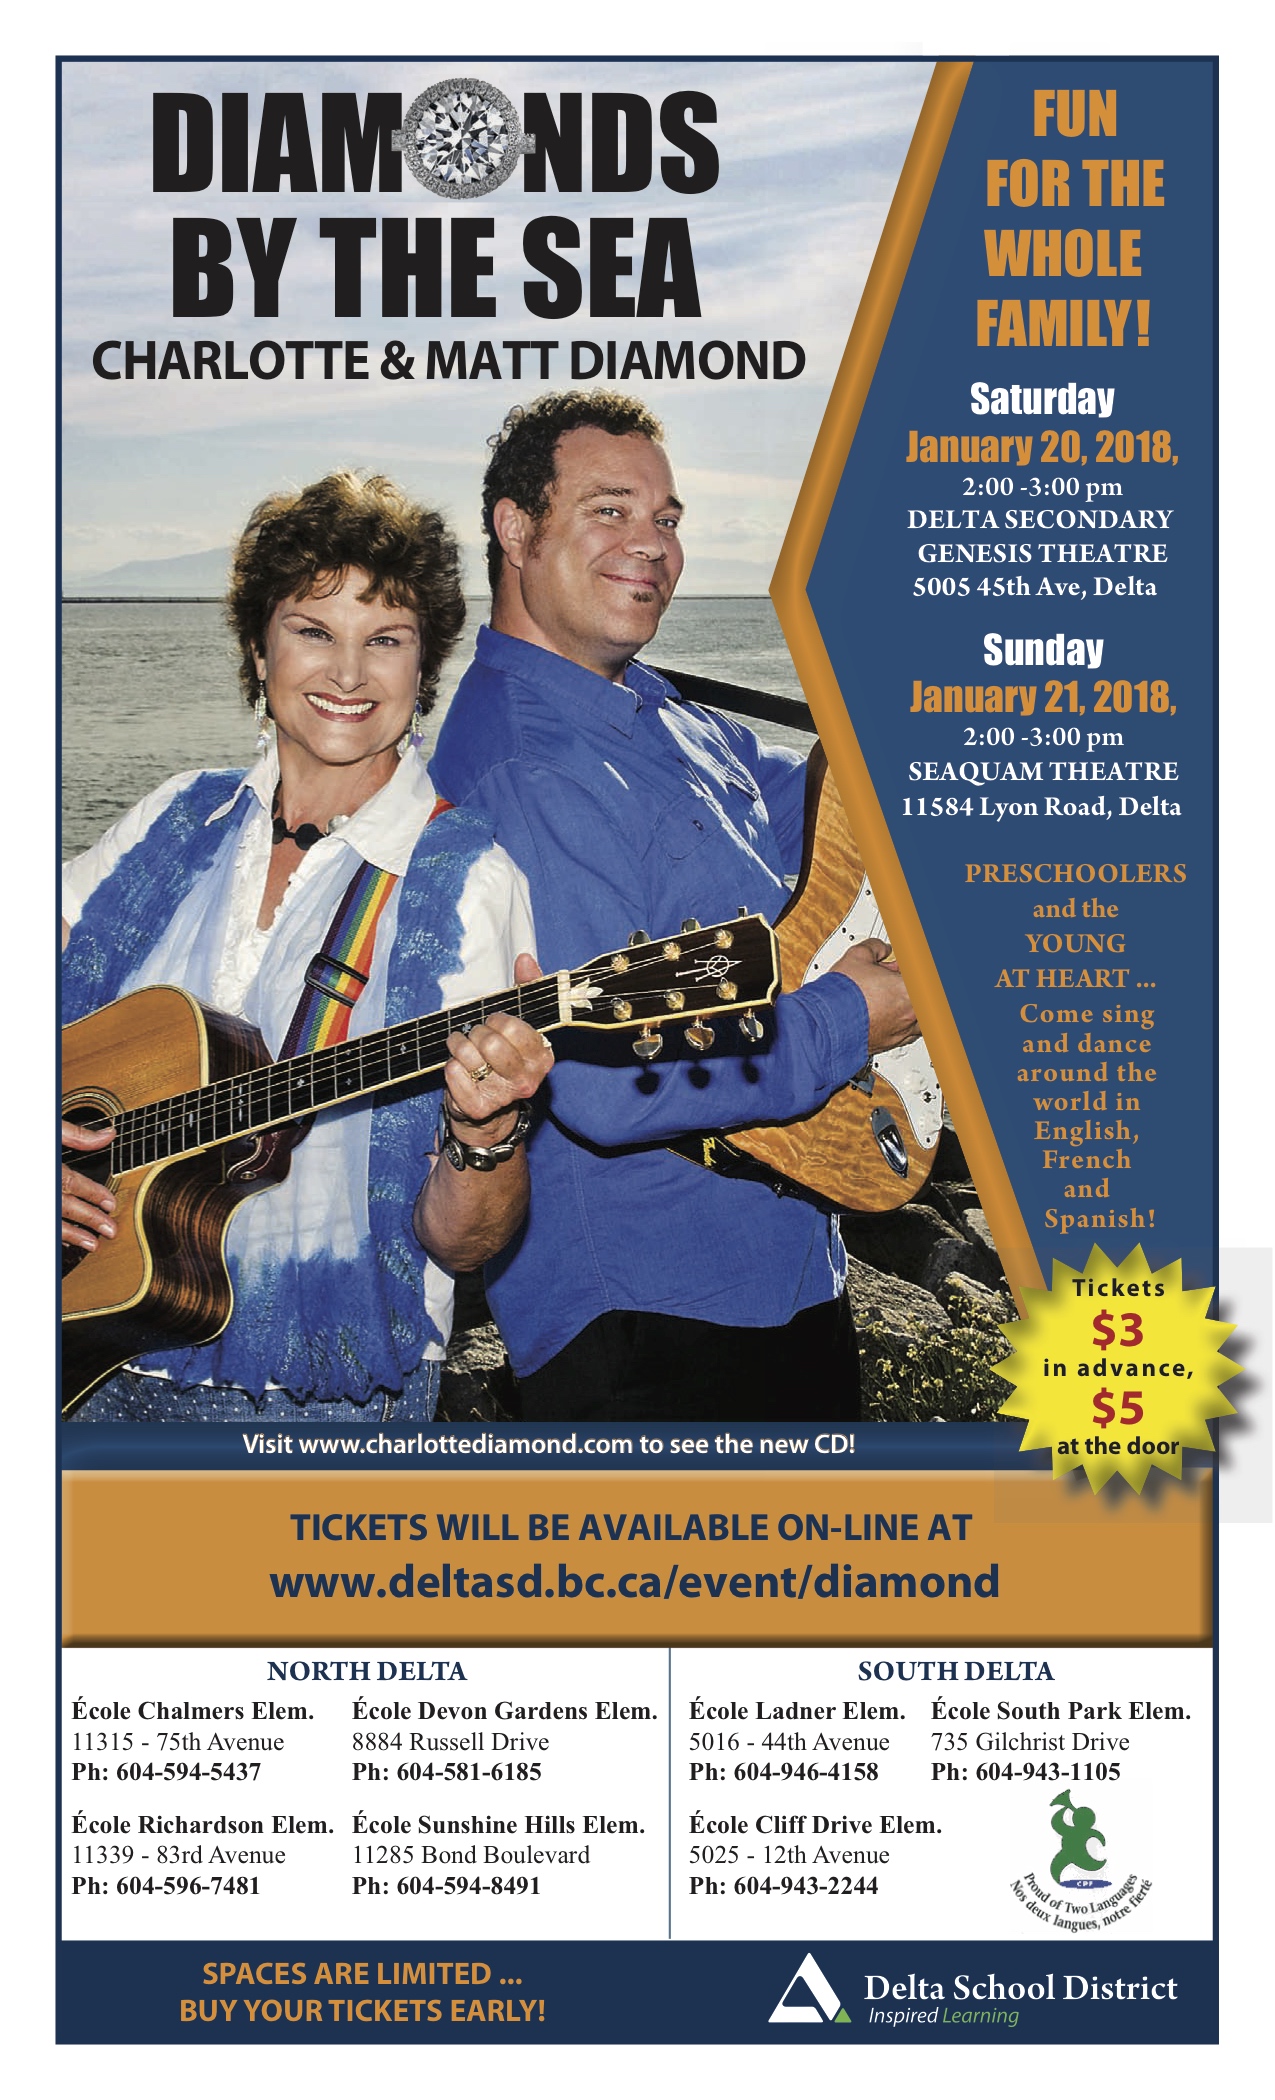 Charlotte Diamond in Concert with Delta School District January 20-21, 2018